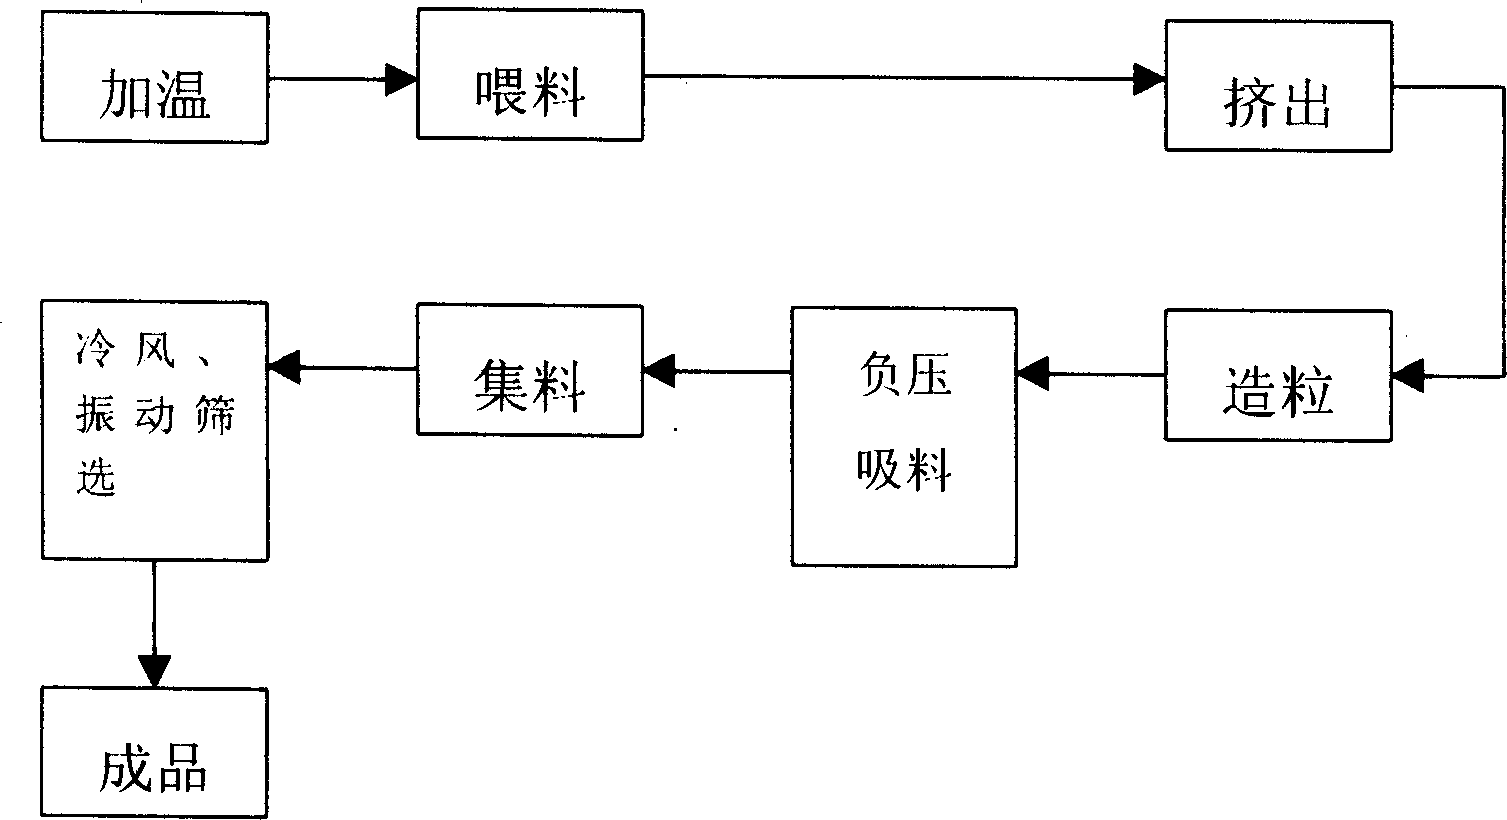 Thermosetting plastic extruding and pelletizing process